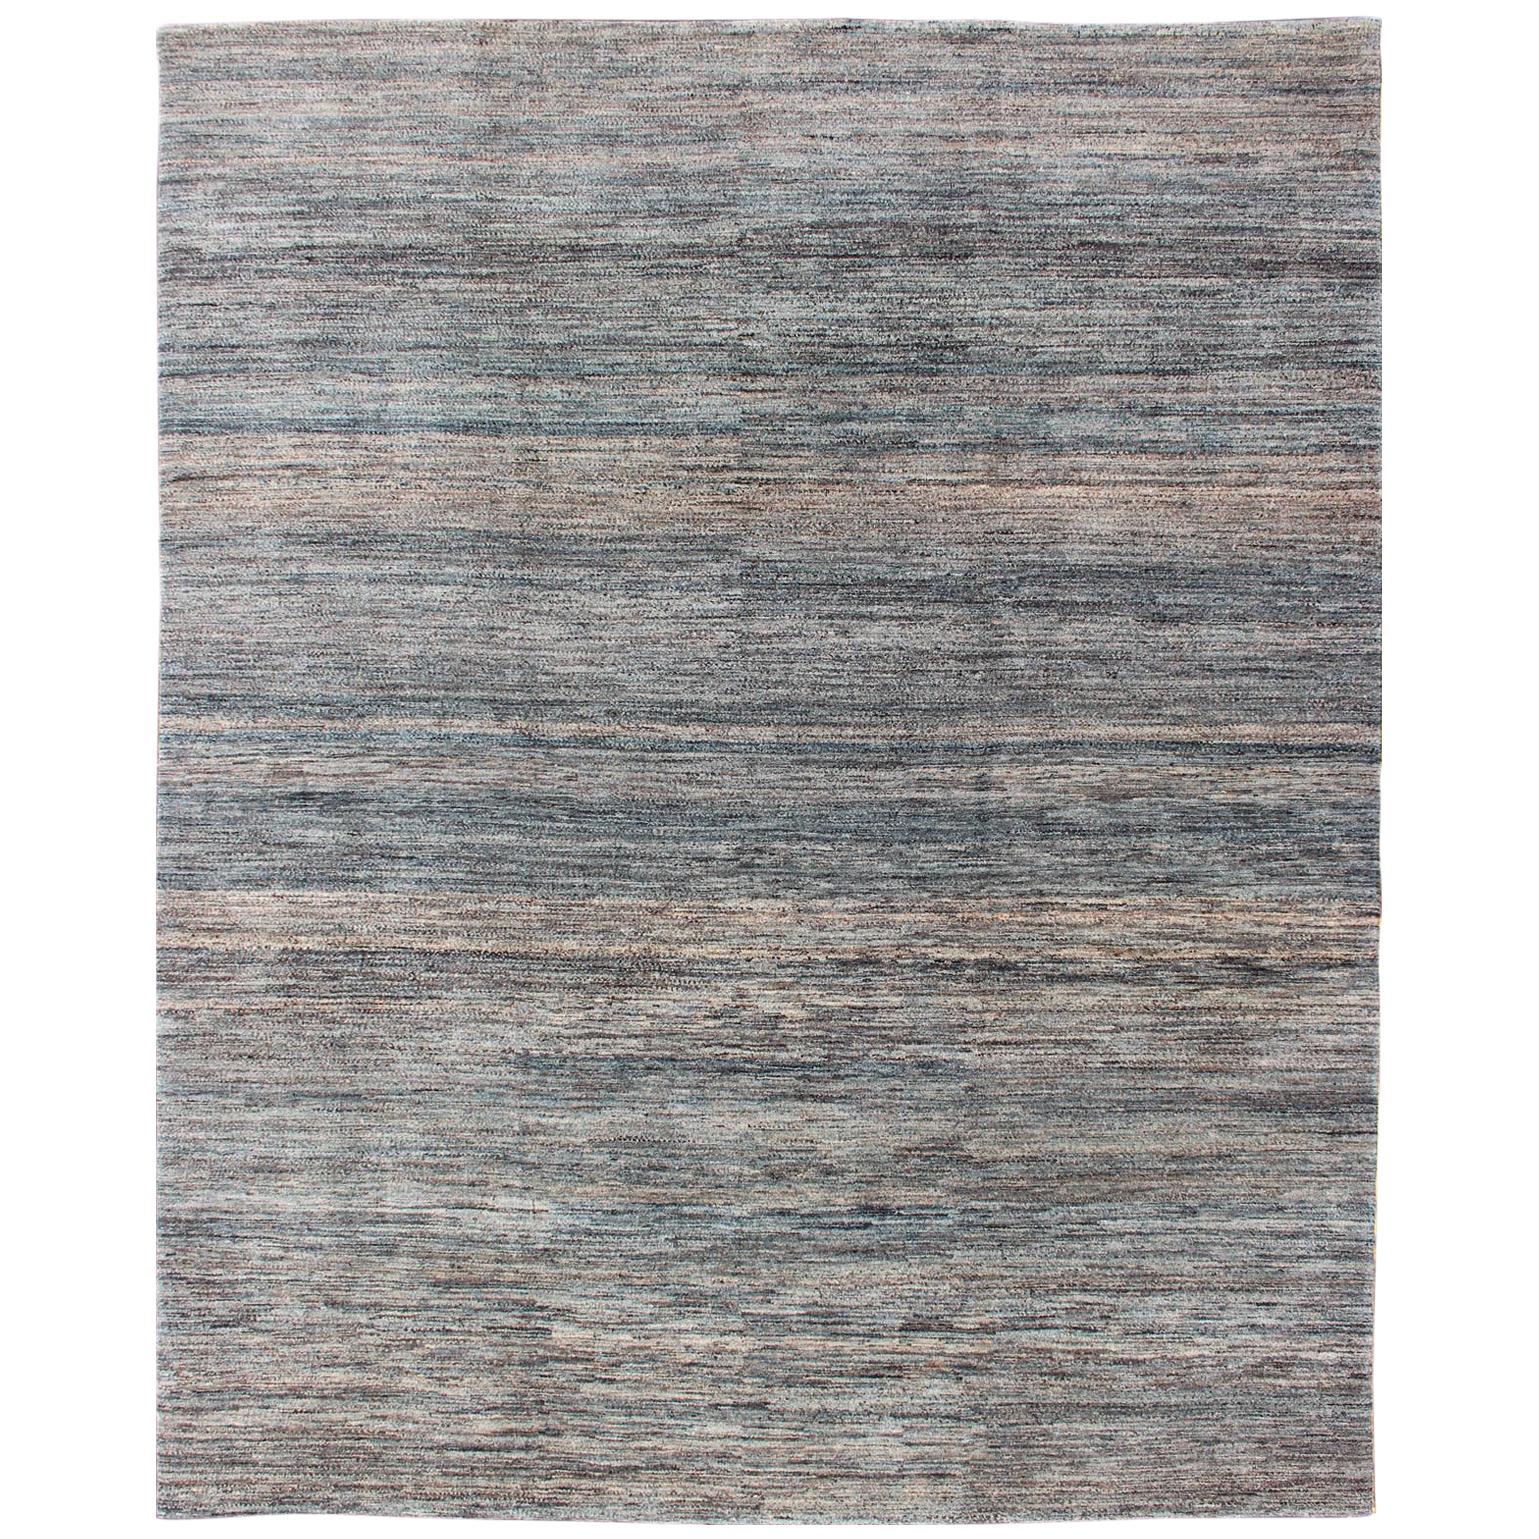  Fine Modern Rug in Solid design with Variegated Blue, brown, Tan, Taupe & Gray For Sale